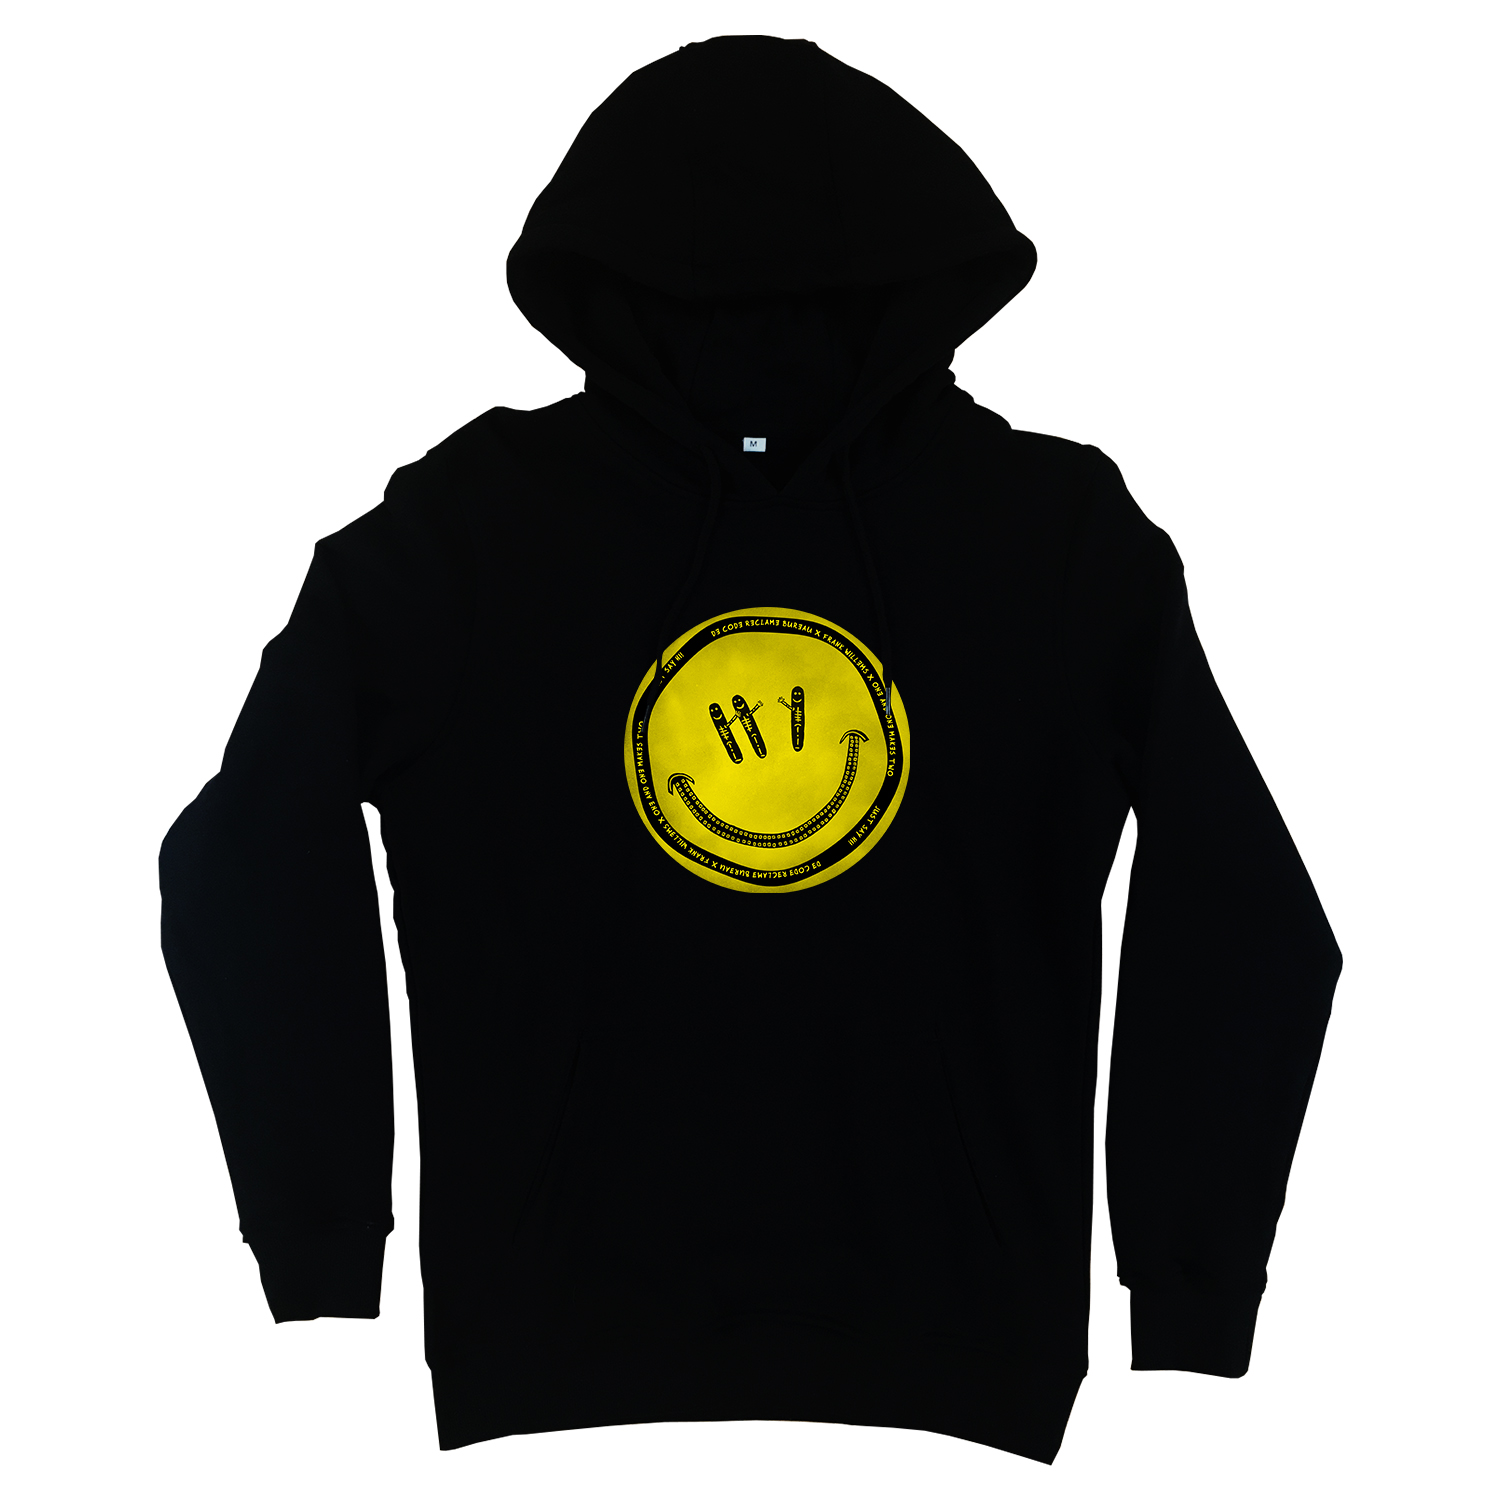 Hoodie - zwart - voor - JUST SAY HI! by De Code x Frank Willems - ONE AND ONE MAKES TWO